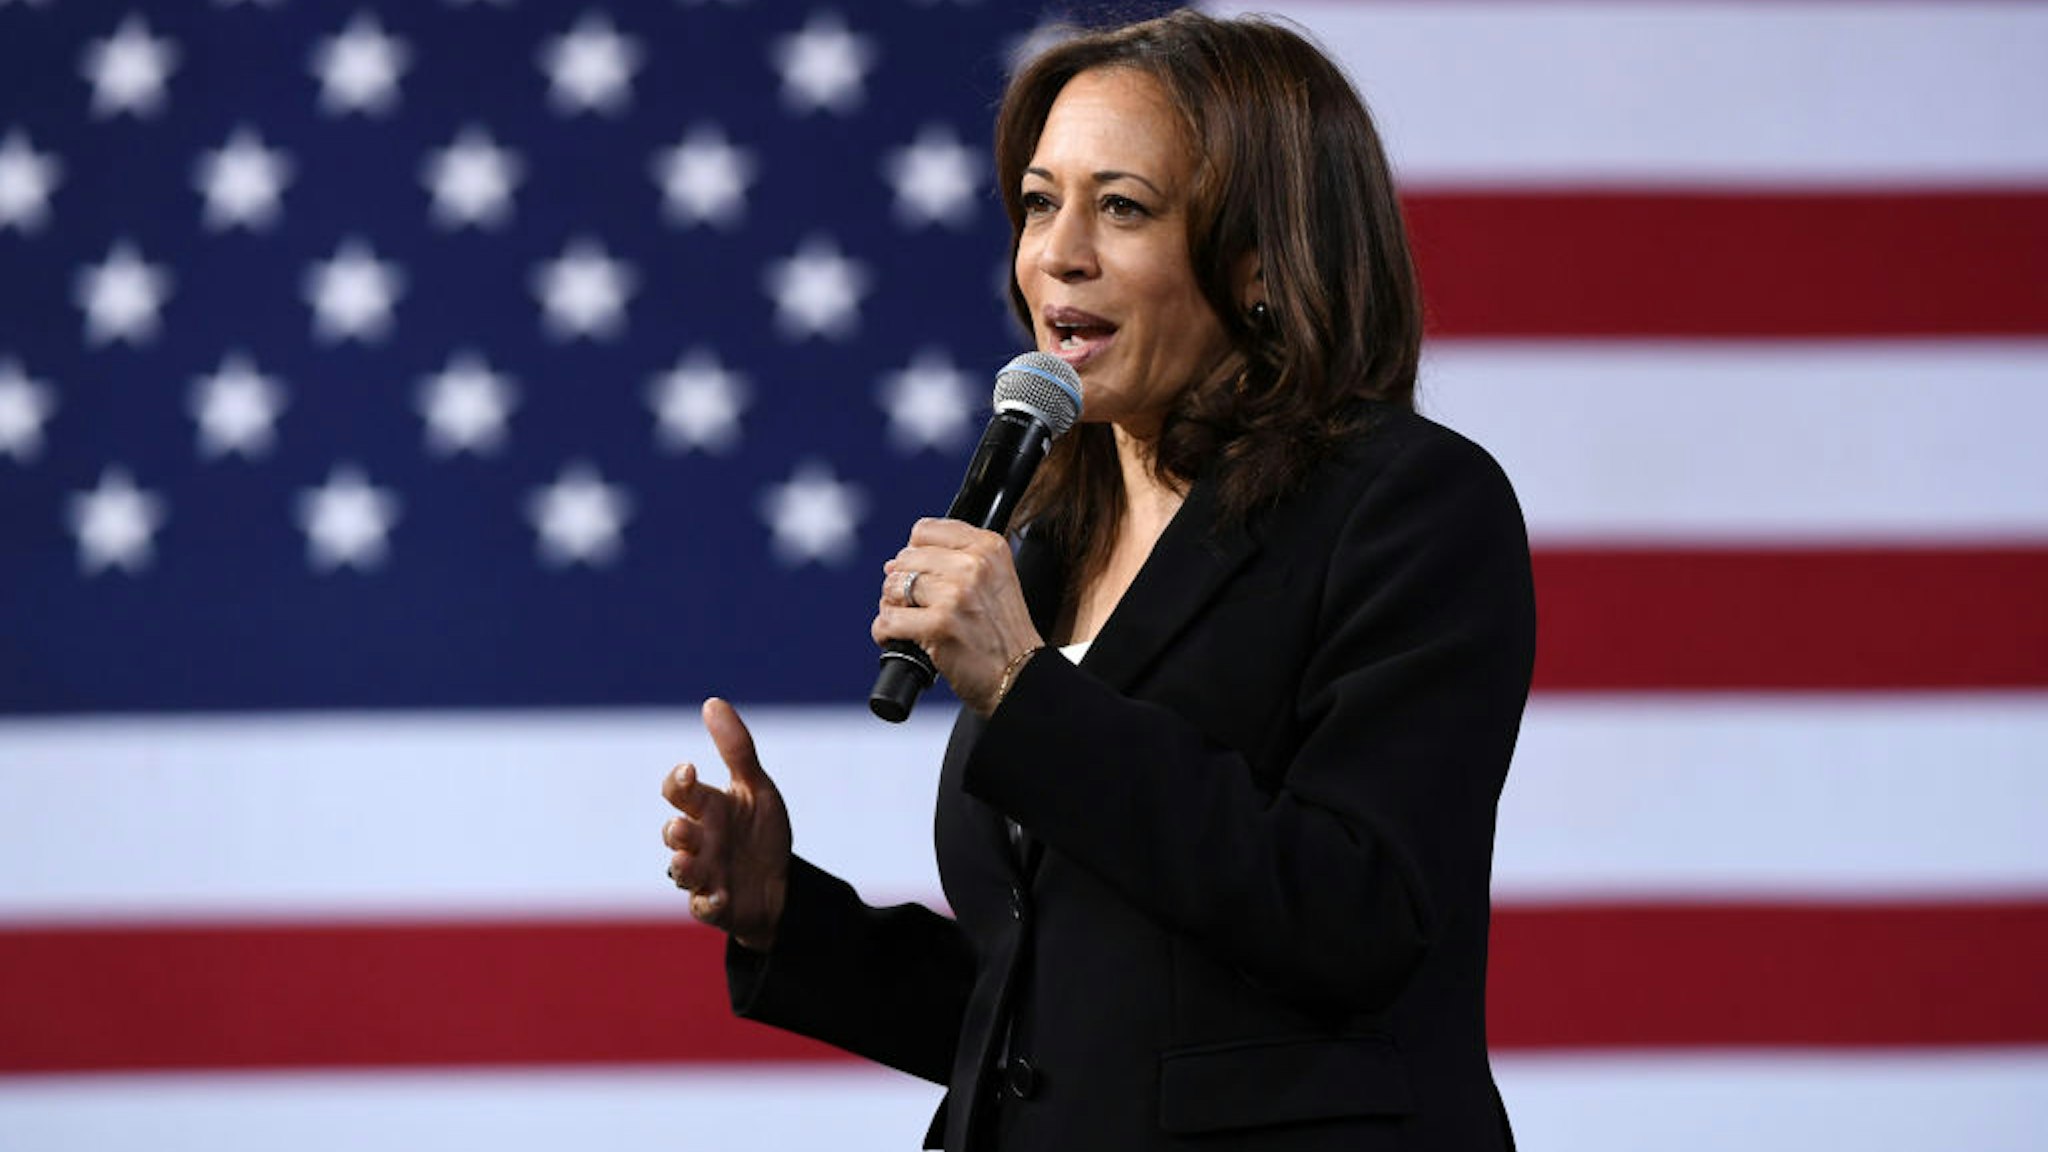 LAS VEGAS, NEVADA - APRIL 27: Democratic presidential candidate U.S. Sen. Kamala Harris (D-CA) speaks at the National Forum on Wages and Working People: Creating an Economy That Works for All at Enclave on April 27, 2019 in Las Vegas, Nevada. Six of the 2020 Democratic presidential candidates are attending the forum, held by the Service Employees International Union and the Center for American Progress Action Fund, to share their economic policies.